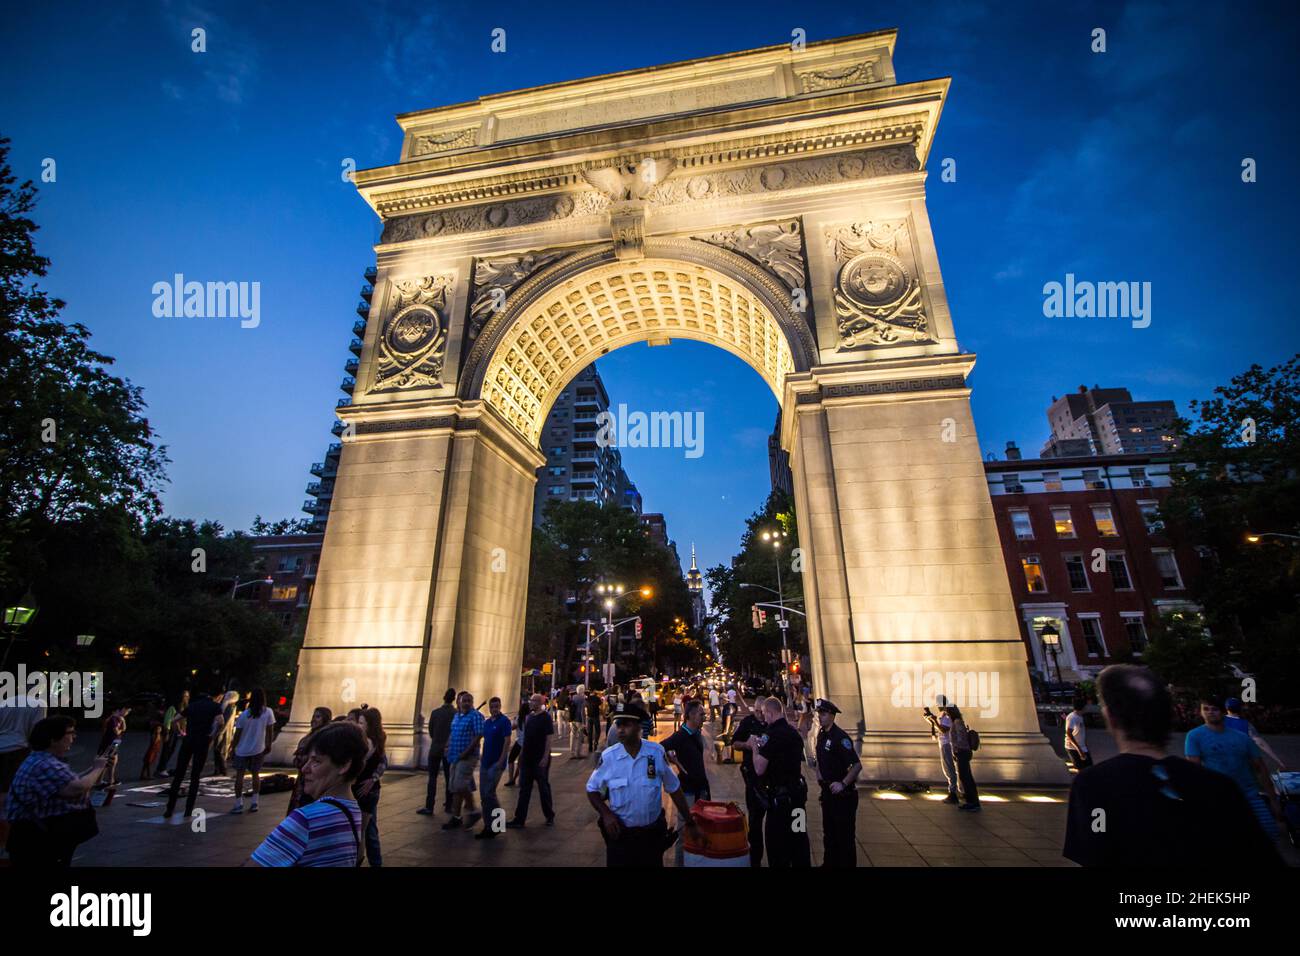 The Washington Square Arch in Greenwich Village, NYC. Stock Photo